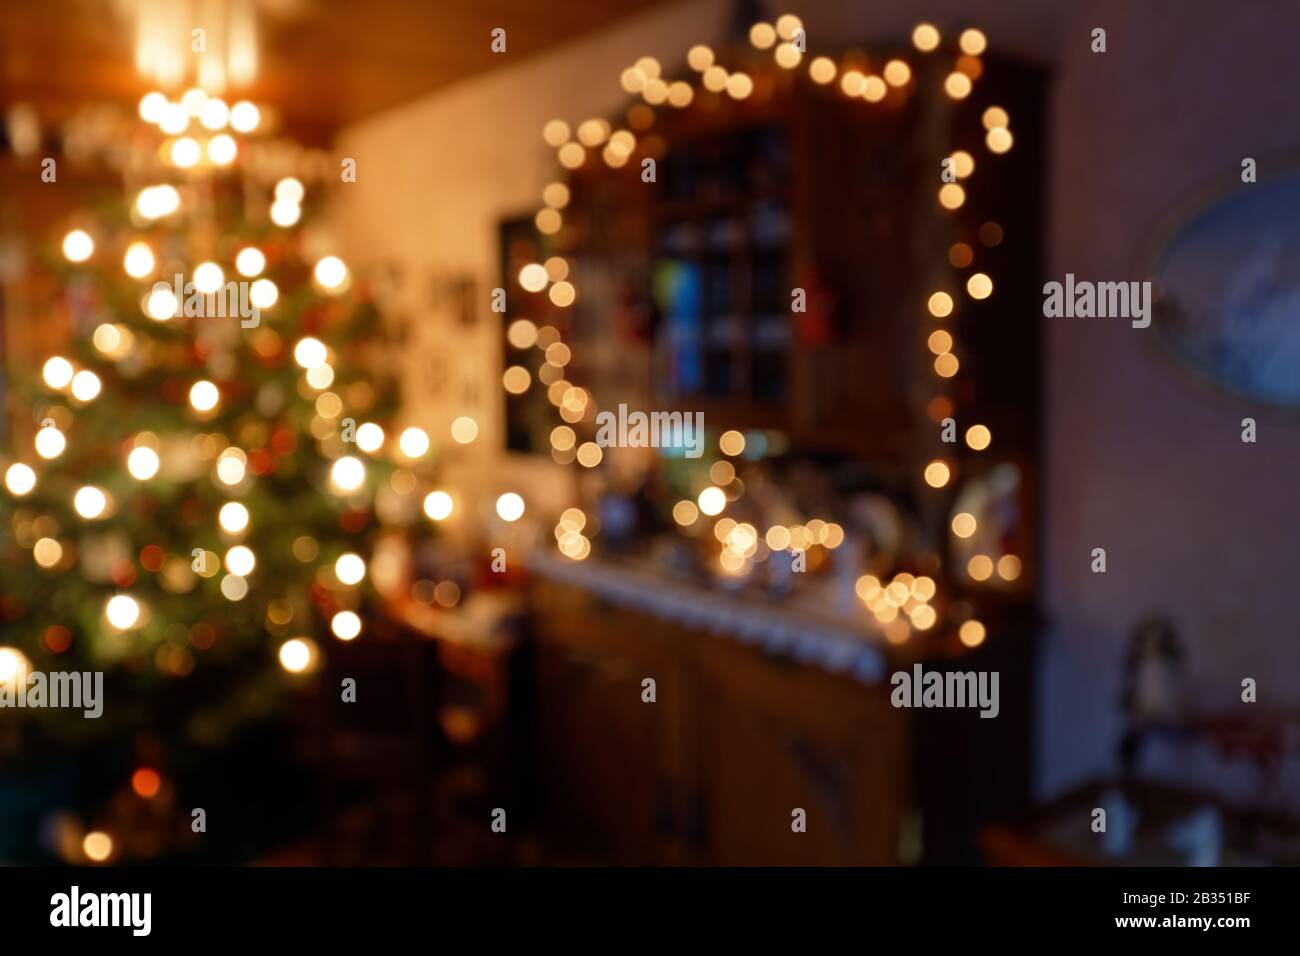 Blurred Family Room Illumination in Christmas Time Stock Photo